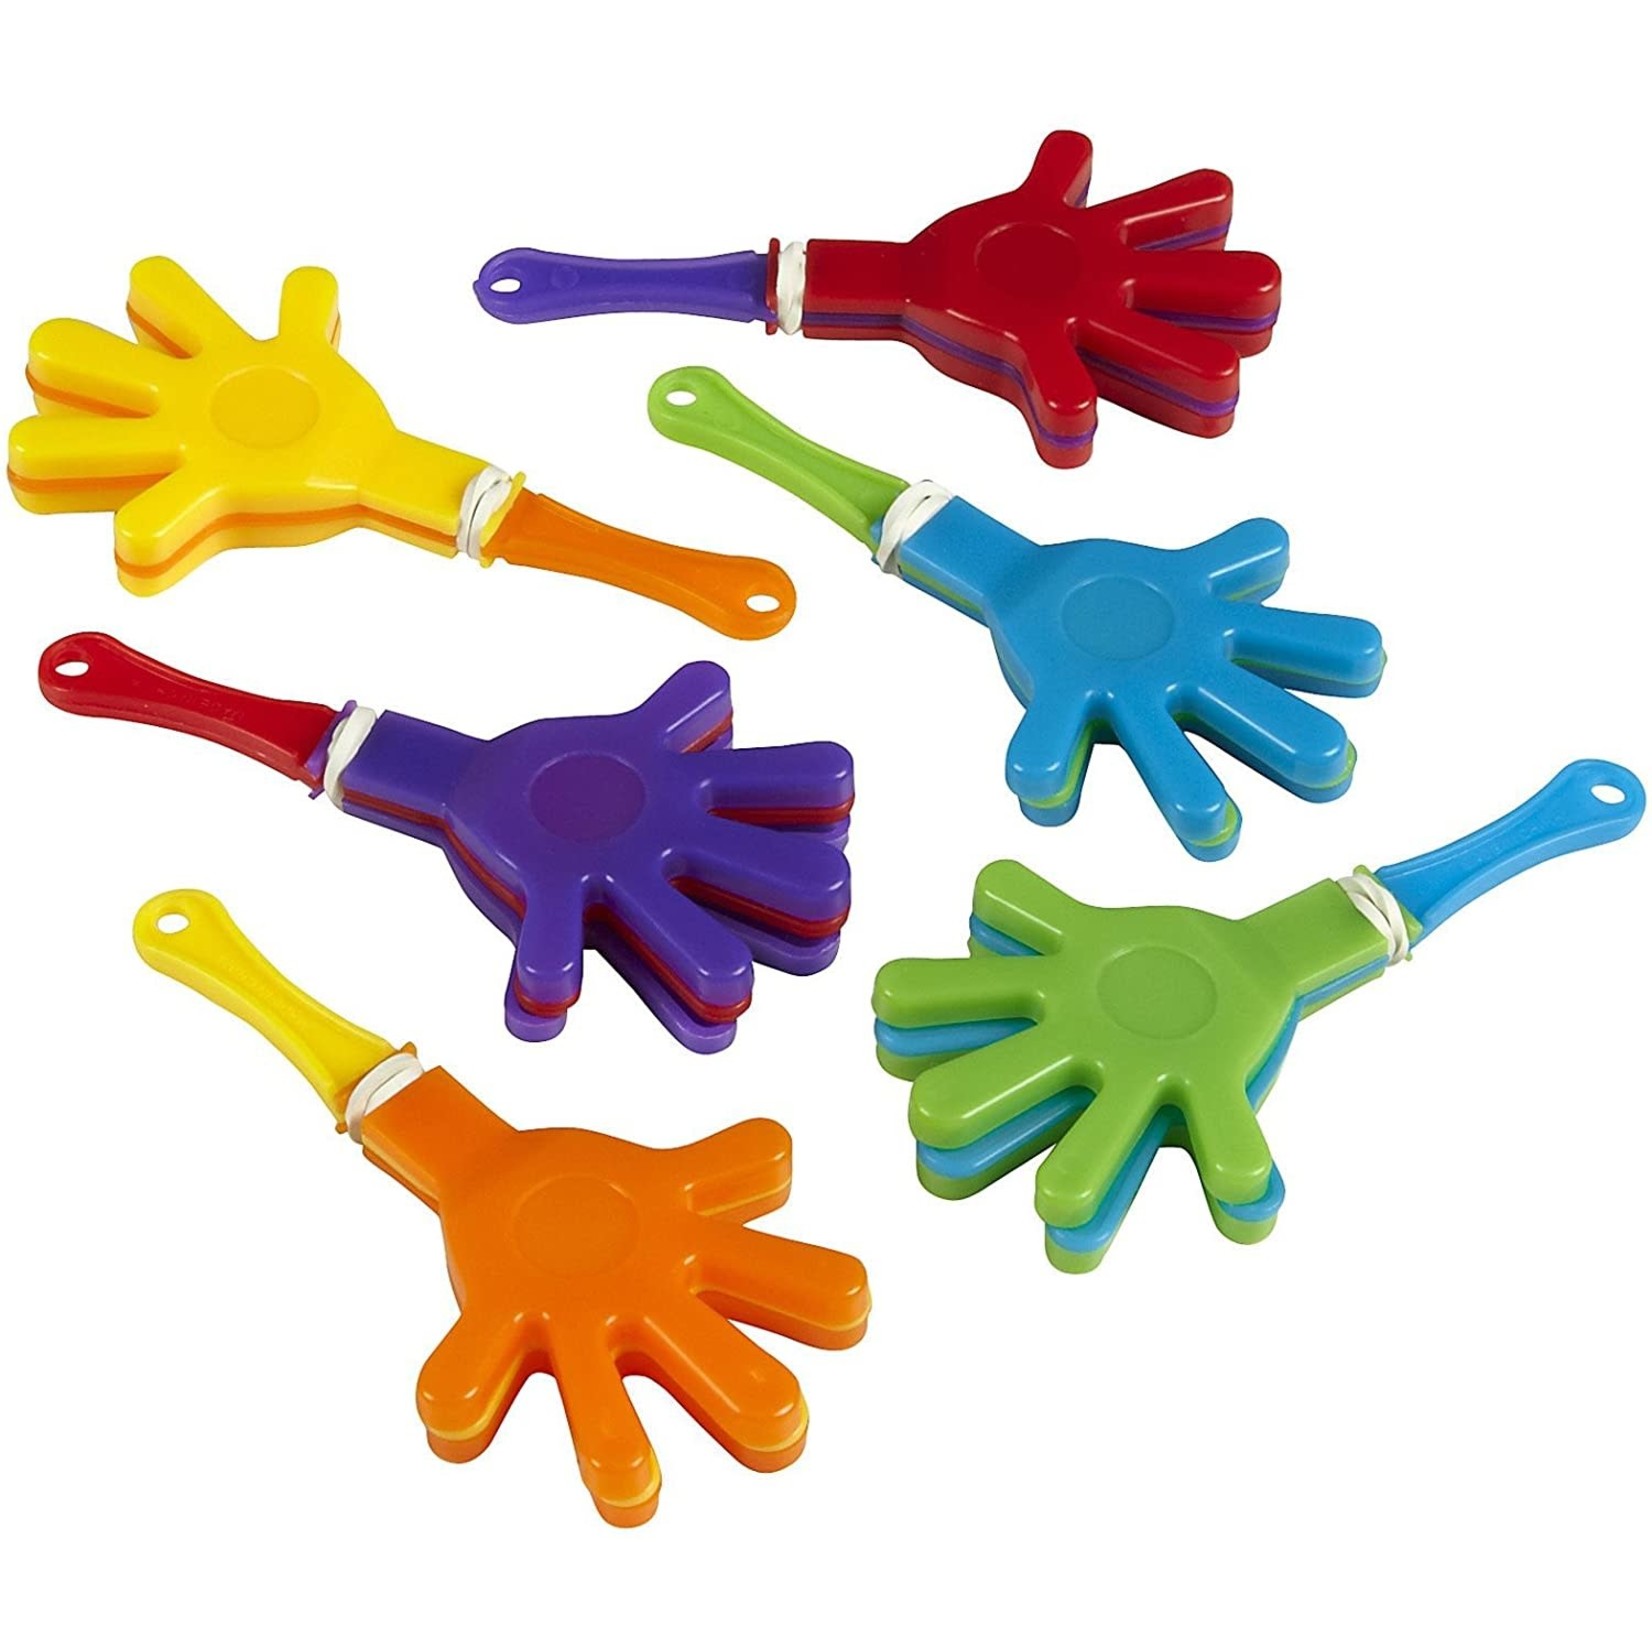 Mini Plastic Hand Clappers, 12-Pack